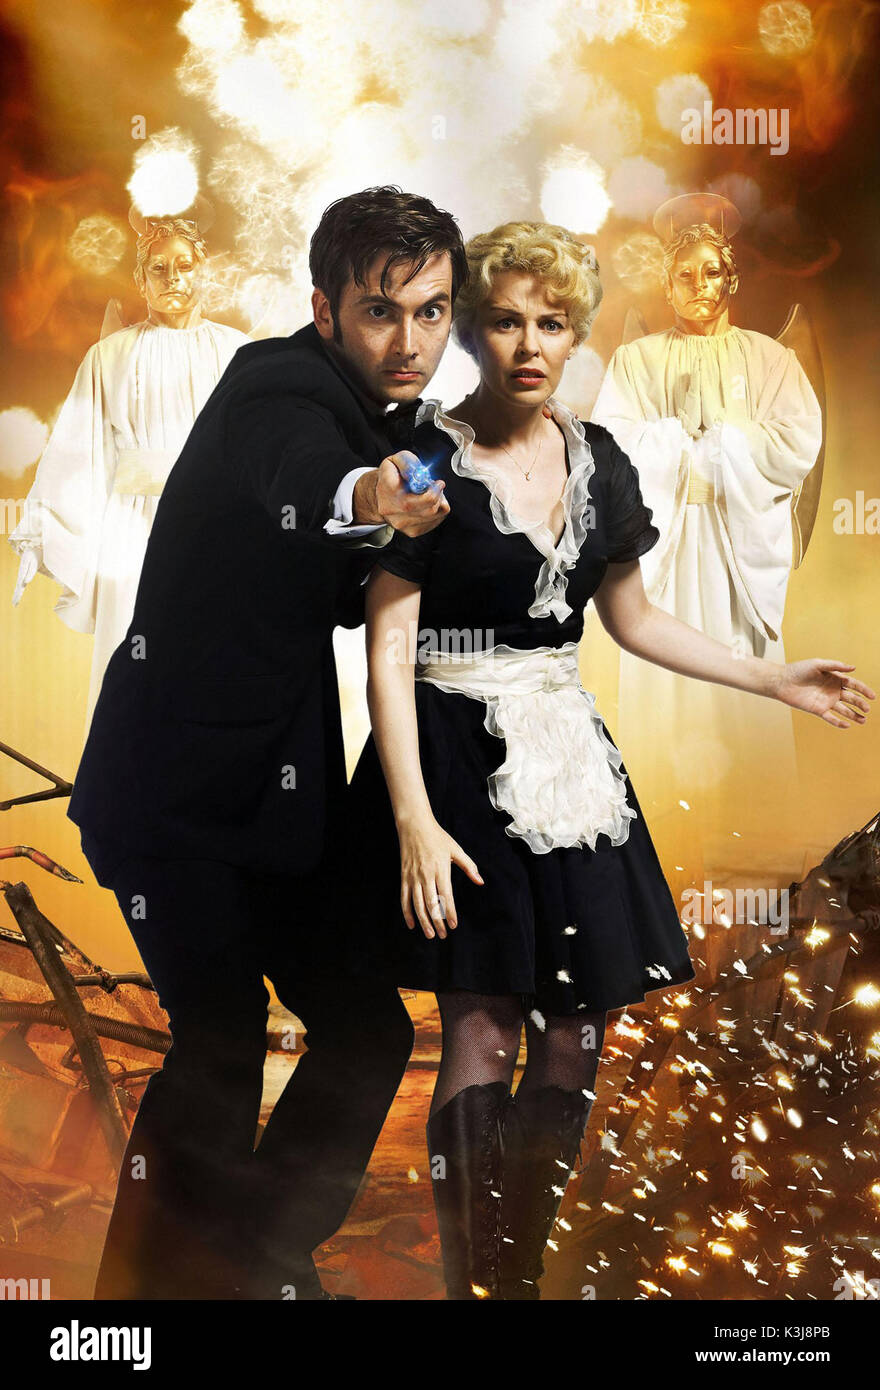 DAVID TENNANT as The Doctor and KYLIE MINOGUE as Astrid Peth in 'Voyage of the Damned'       Date: 2007 Stock Photo